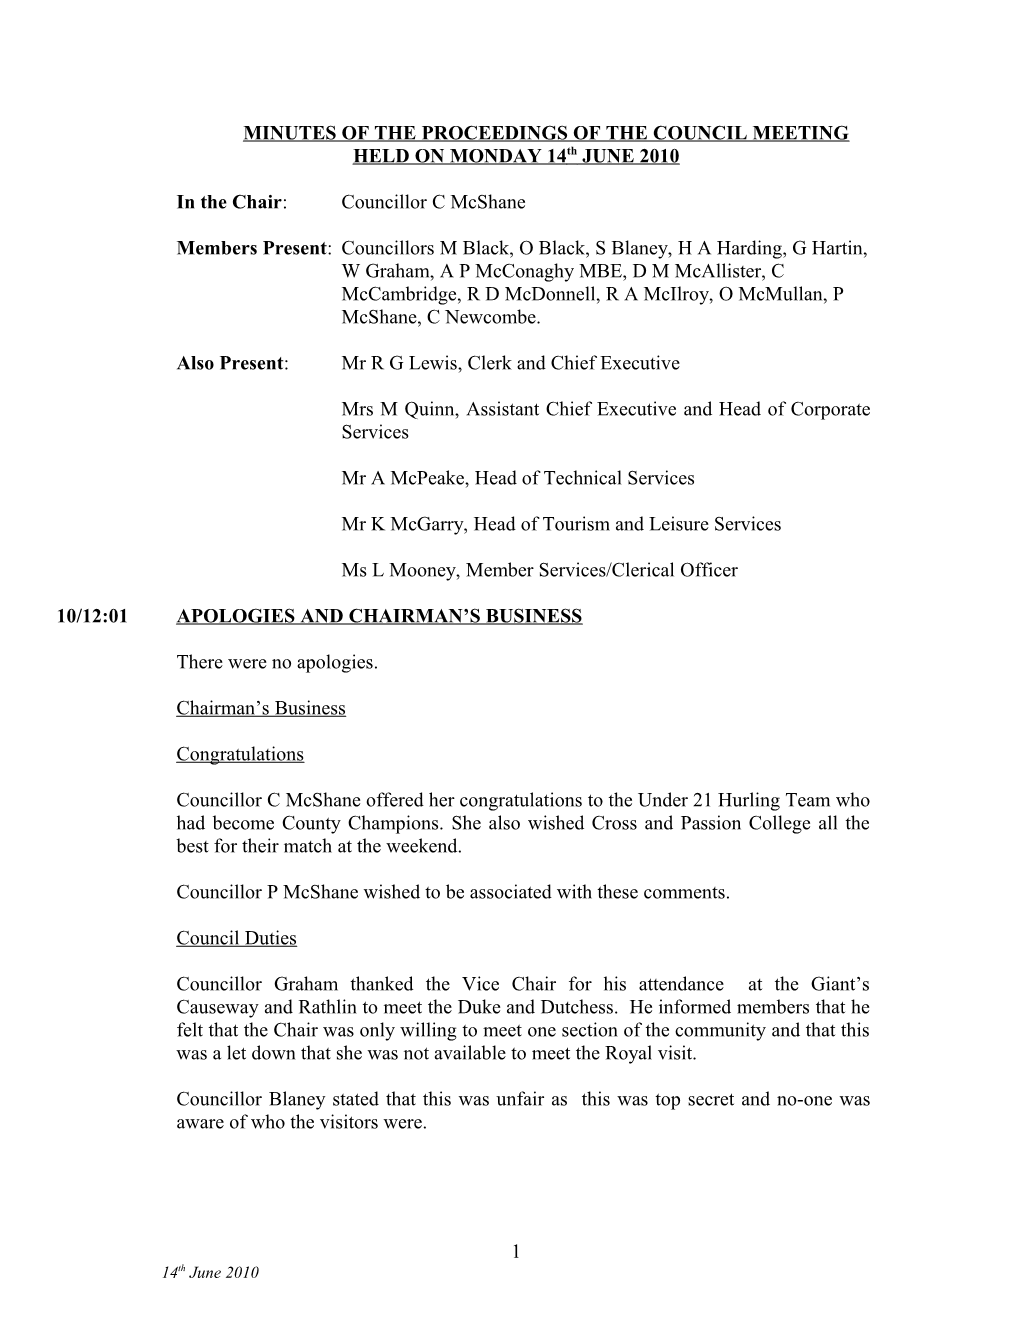 Minutes of the Proceedings of the Council Meeting Held